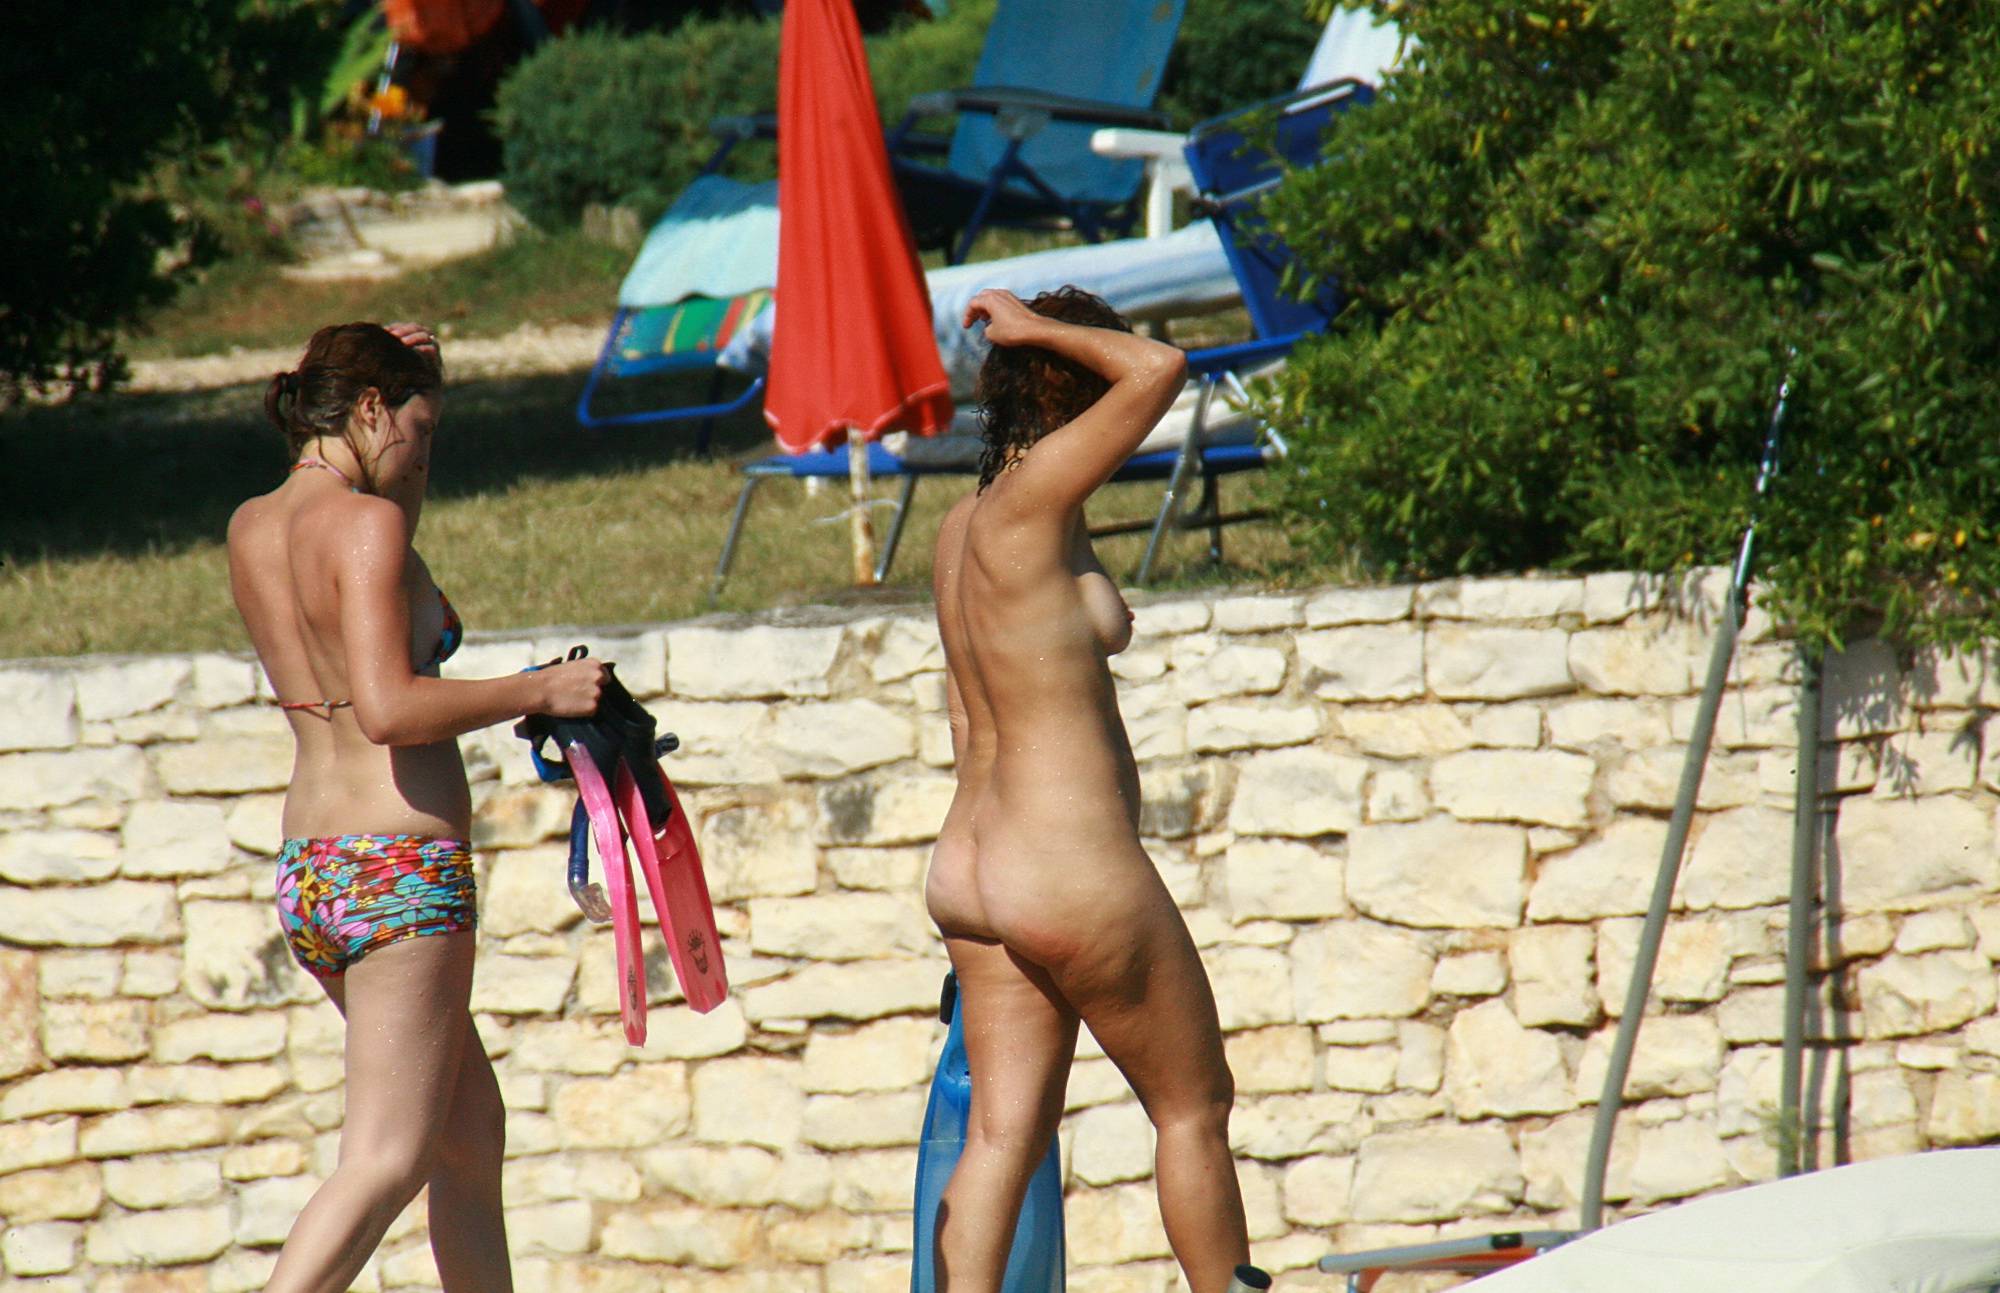 Nudist Pics Natural Tanning Is Best - 1